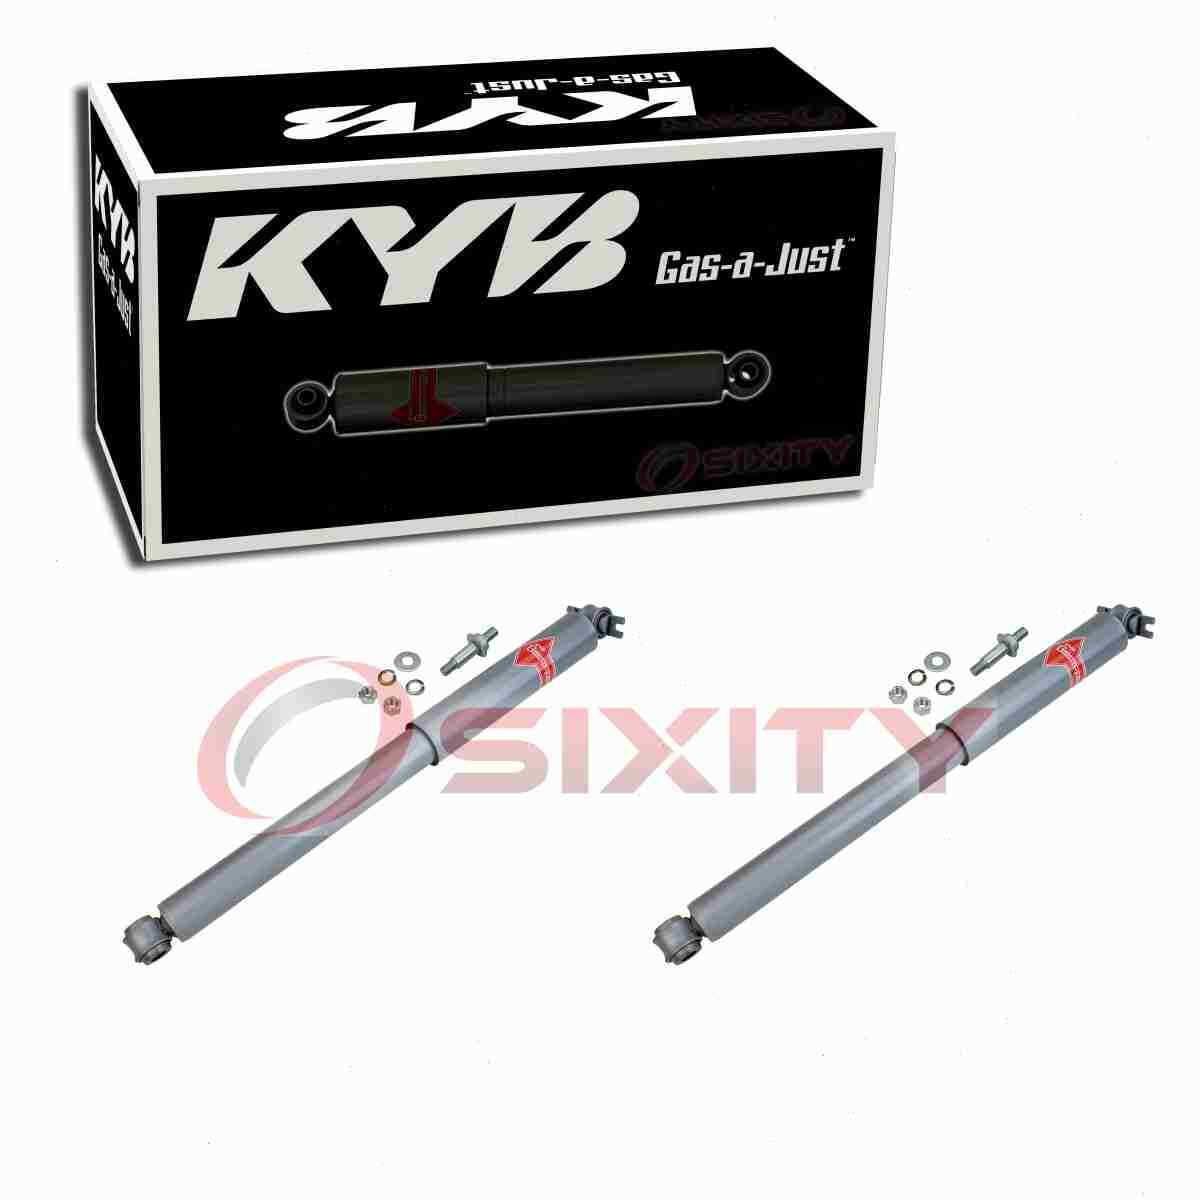 2 pc KYB Gas-a-Just Rear Shock Absorbers for 1978-1988 Oldsmobile Cutlass dv